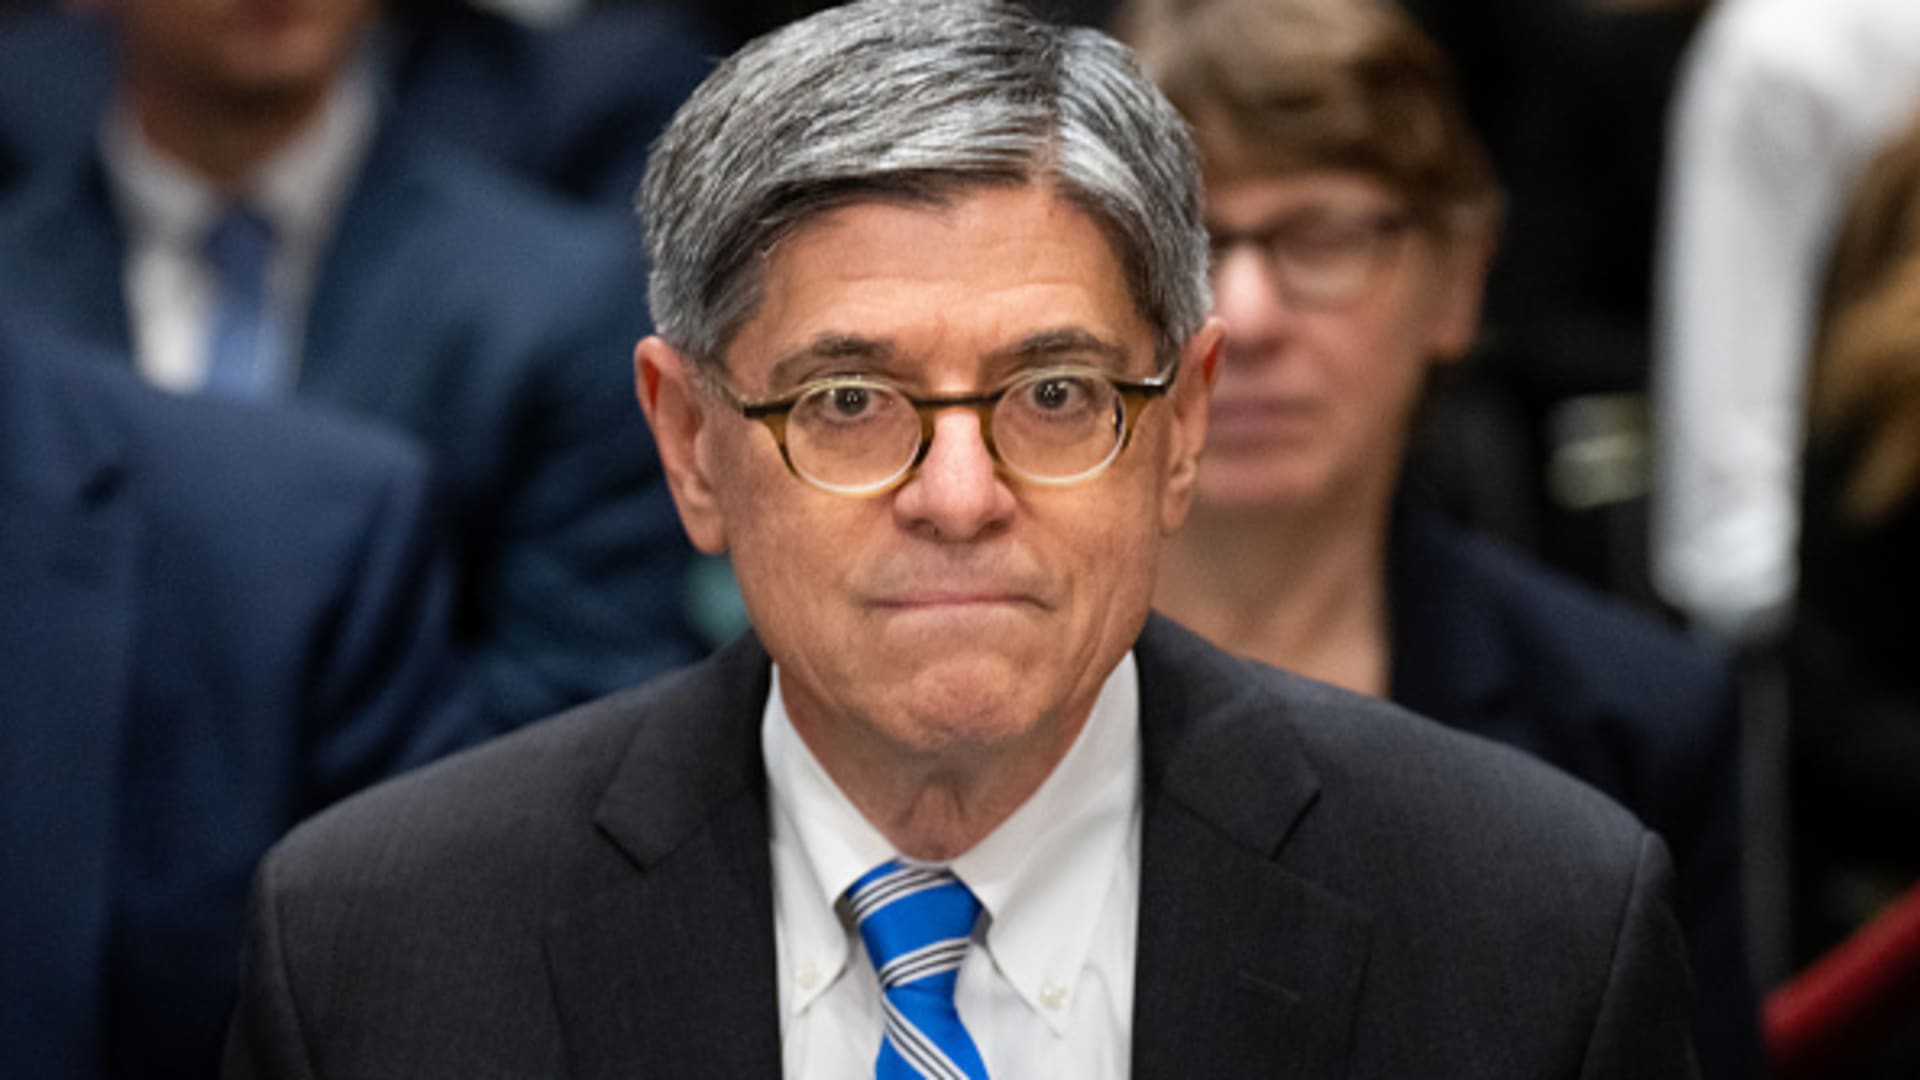 Jack Lew, nominee to be ambassador to Israel, prepares to testify during his confirmation hearing in the Senate Foreign Relations Committee on Wednesday, October 18, 2023.